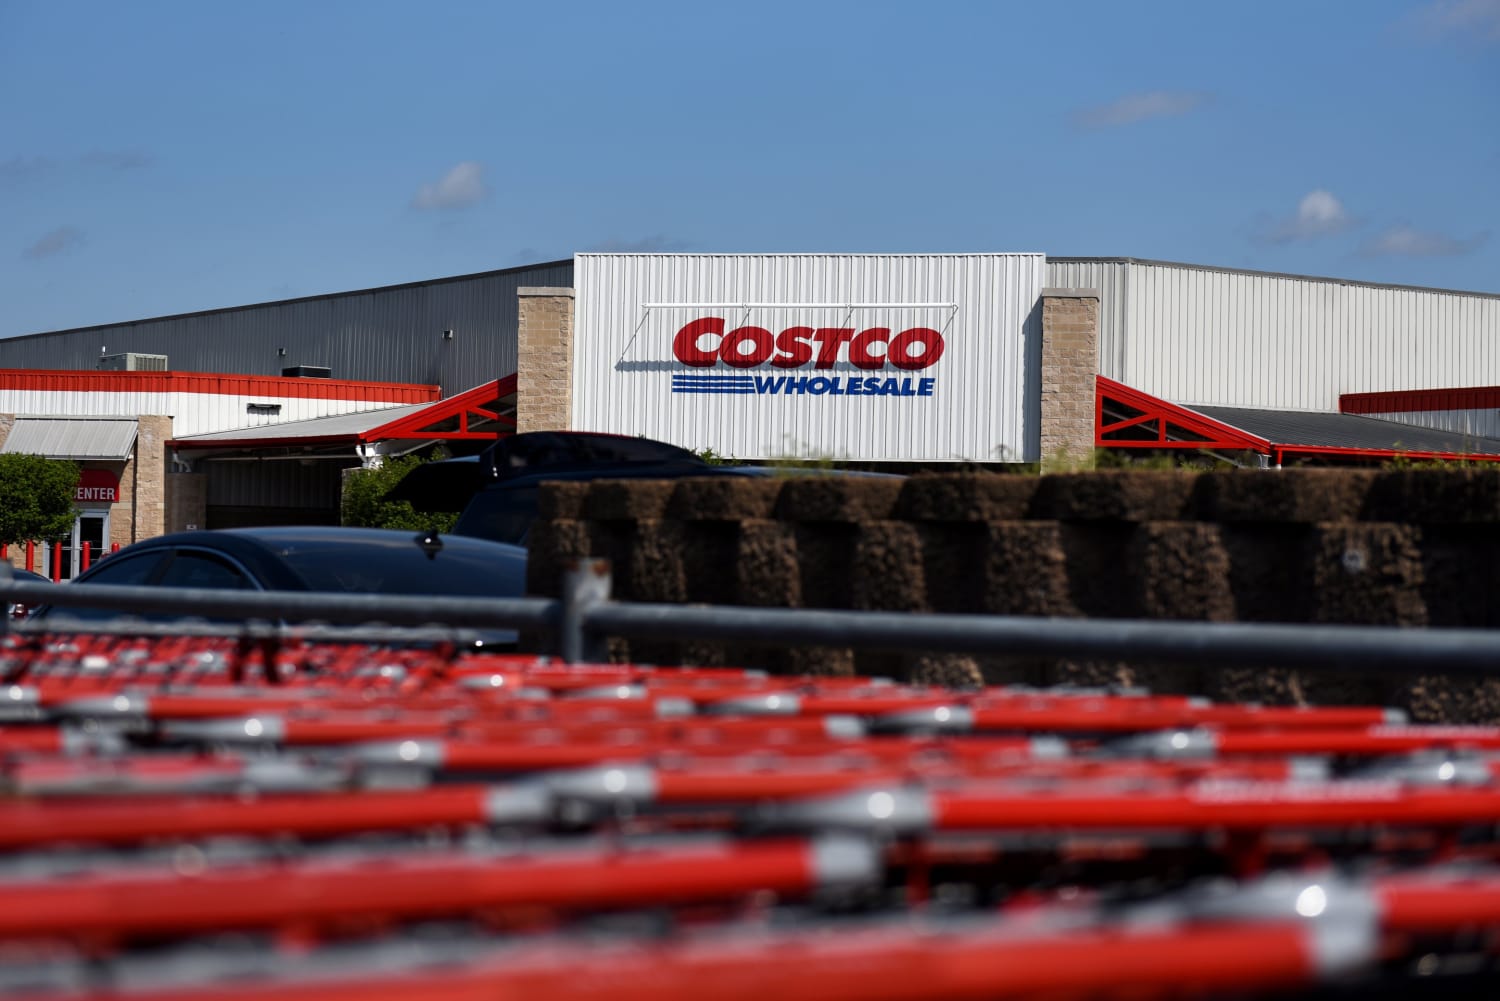 Costco says it will raise its membership prices